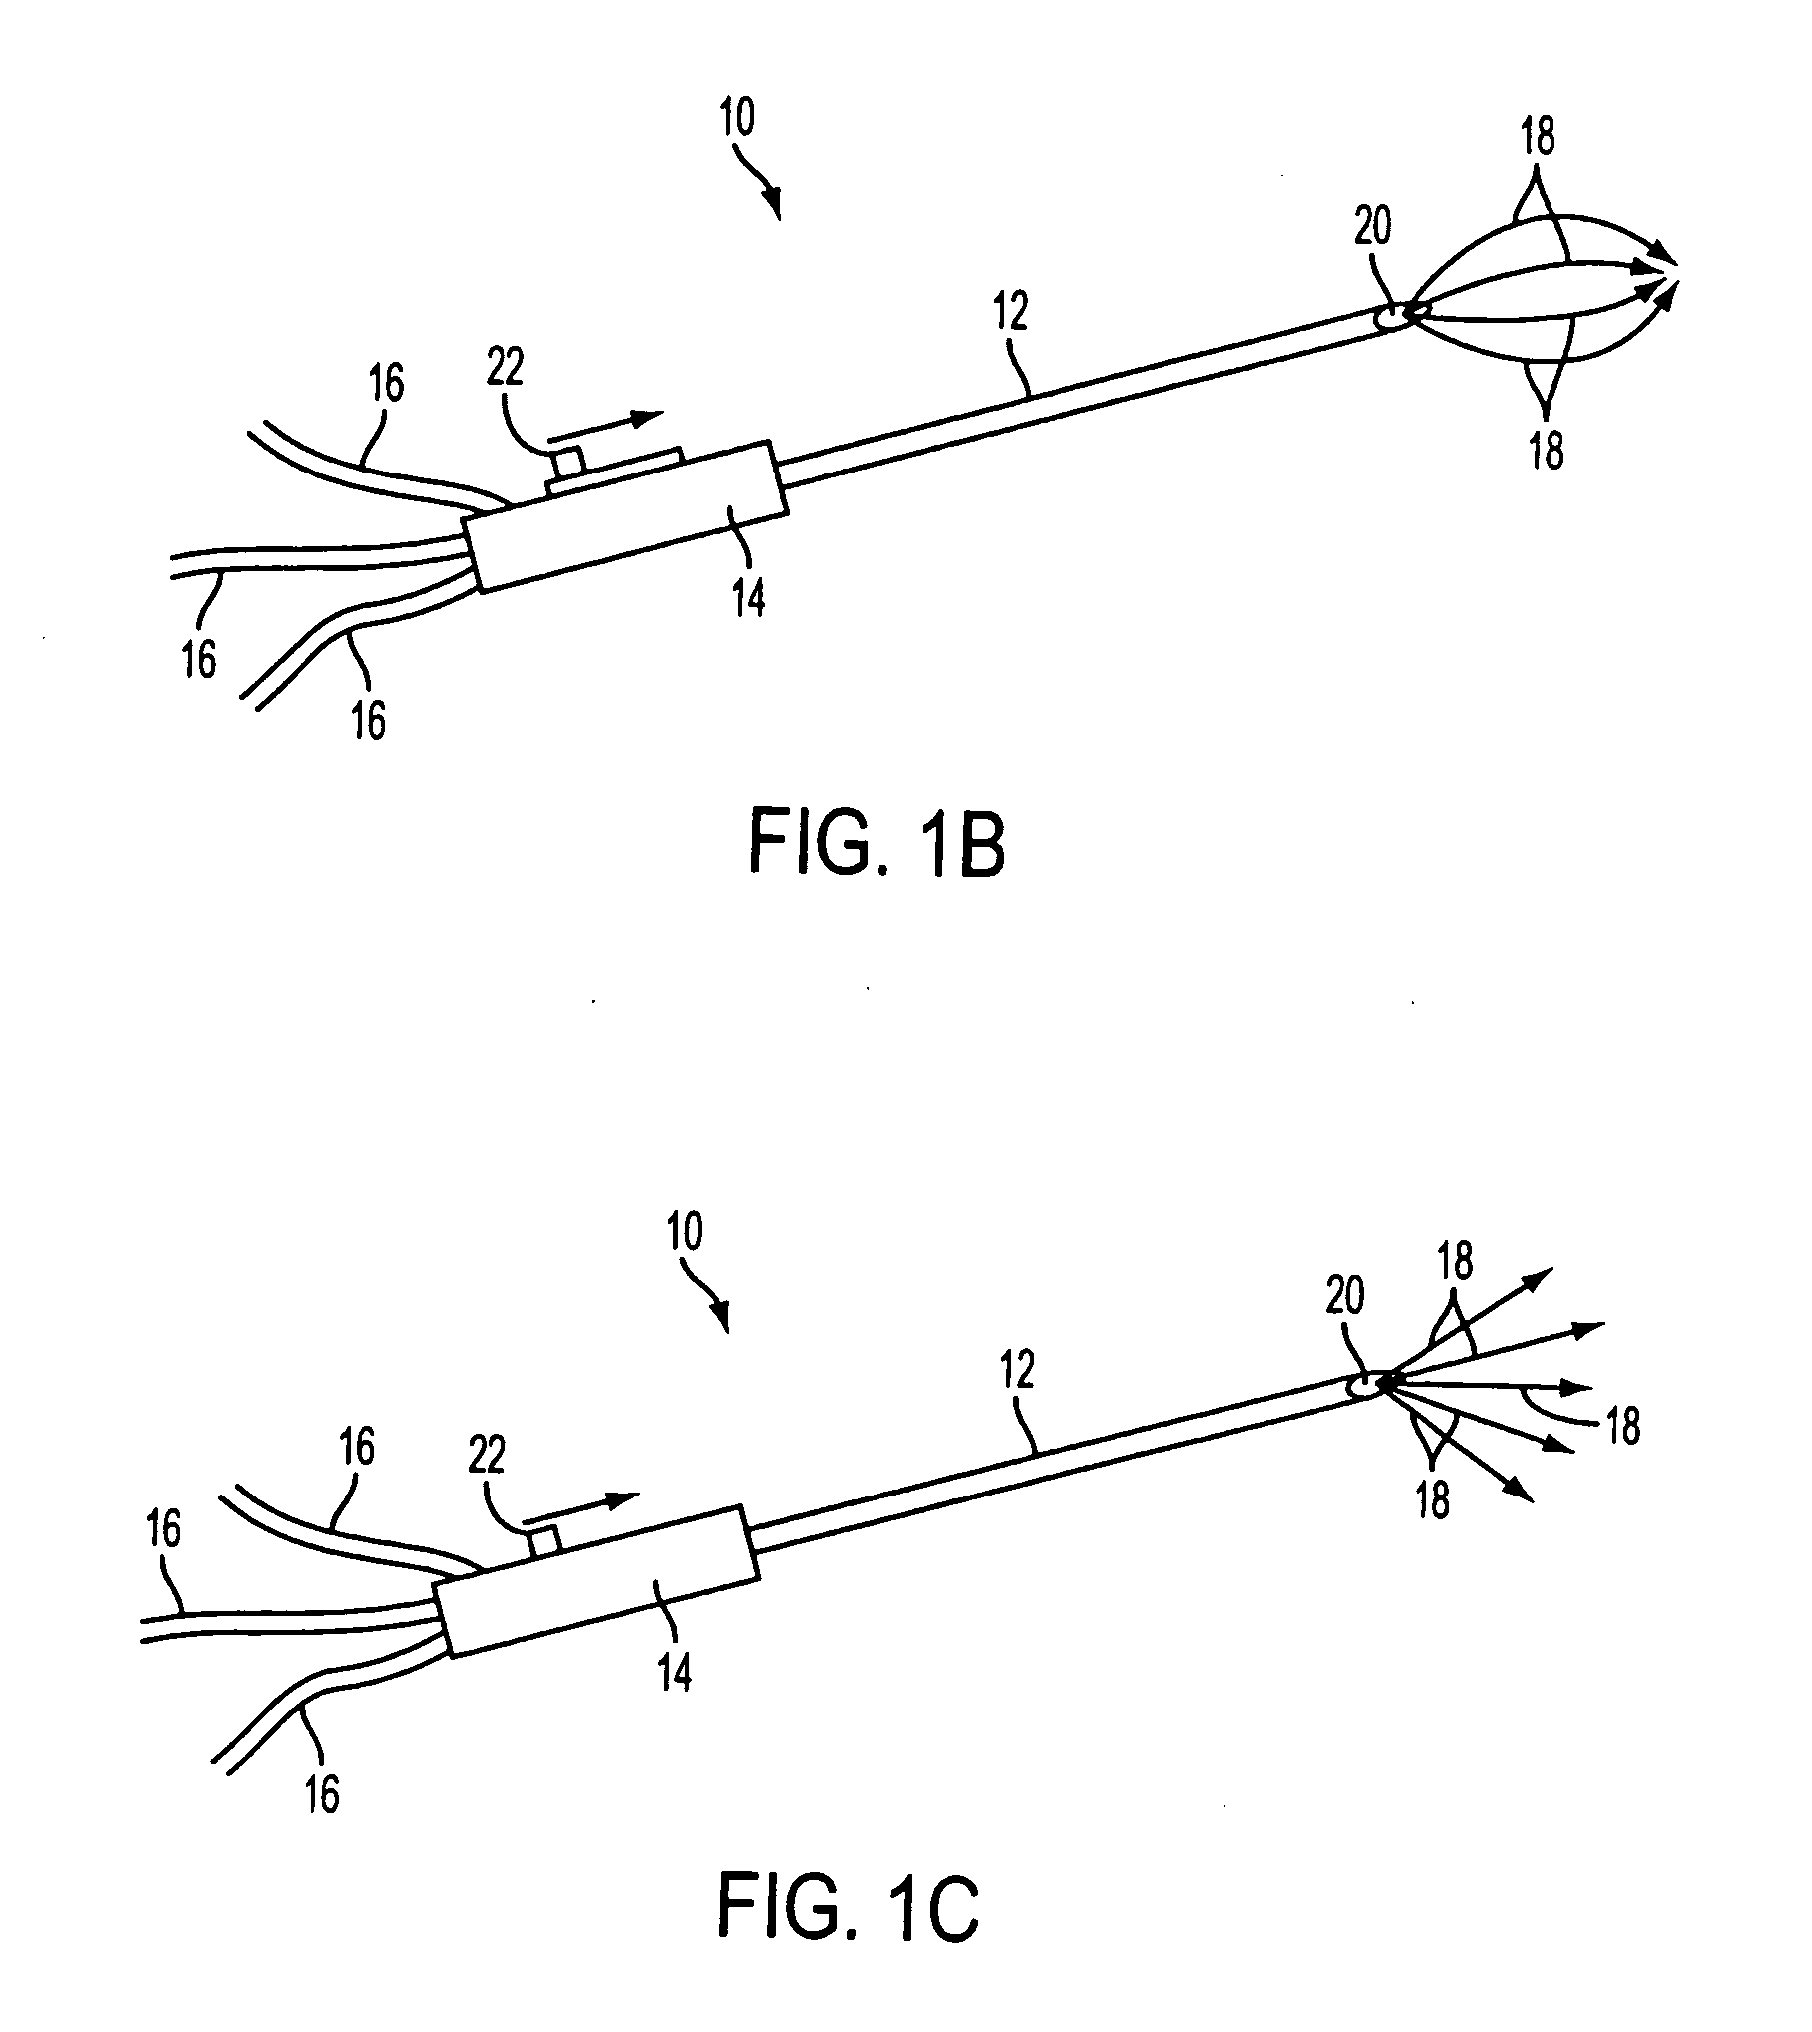 Method for the pre-conditioning/fixation and treatment of diseases with heat activation/release with thermo-activated drugs and gene products